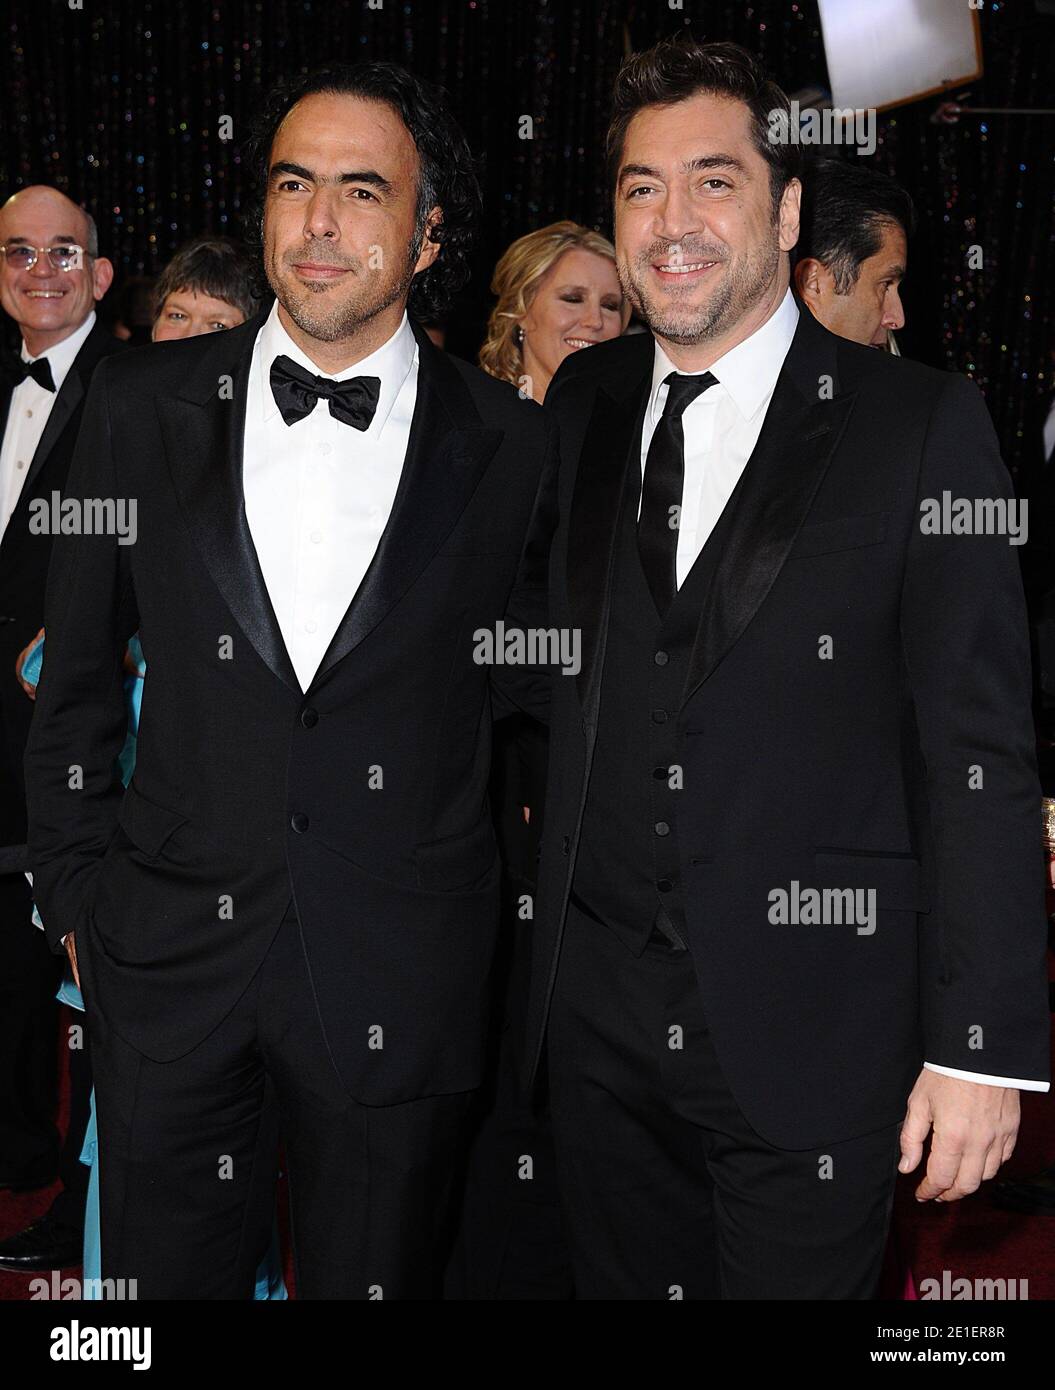 Javier Bardem (right) and Alejandro Gonzalez Inarritu arrive at the 83rd Annual Academy Awards, held at the Kodak Theatre in Los Angeles, CA, USA on February 27, 2011. Photo by Lionel Hahn/ABACAUSA.COM Stock Photo